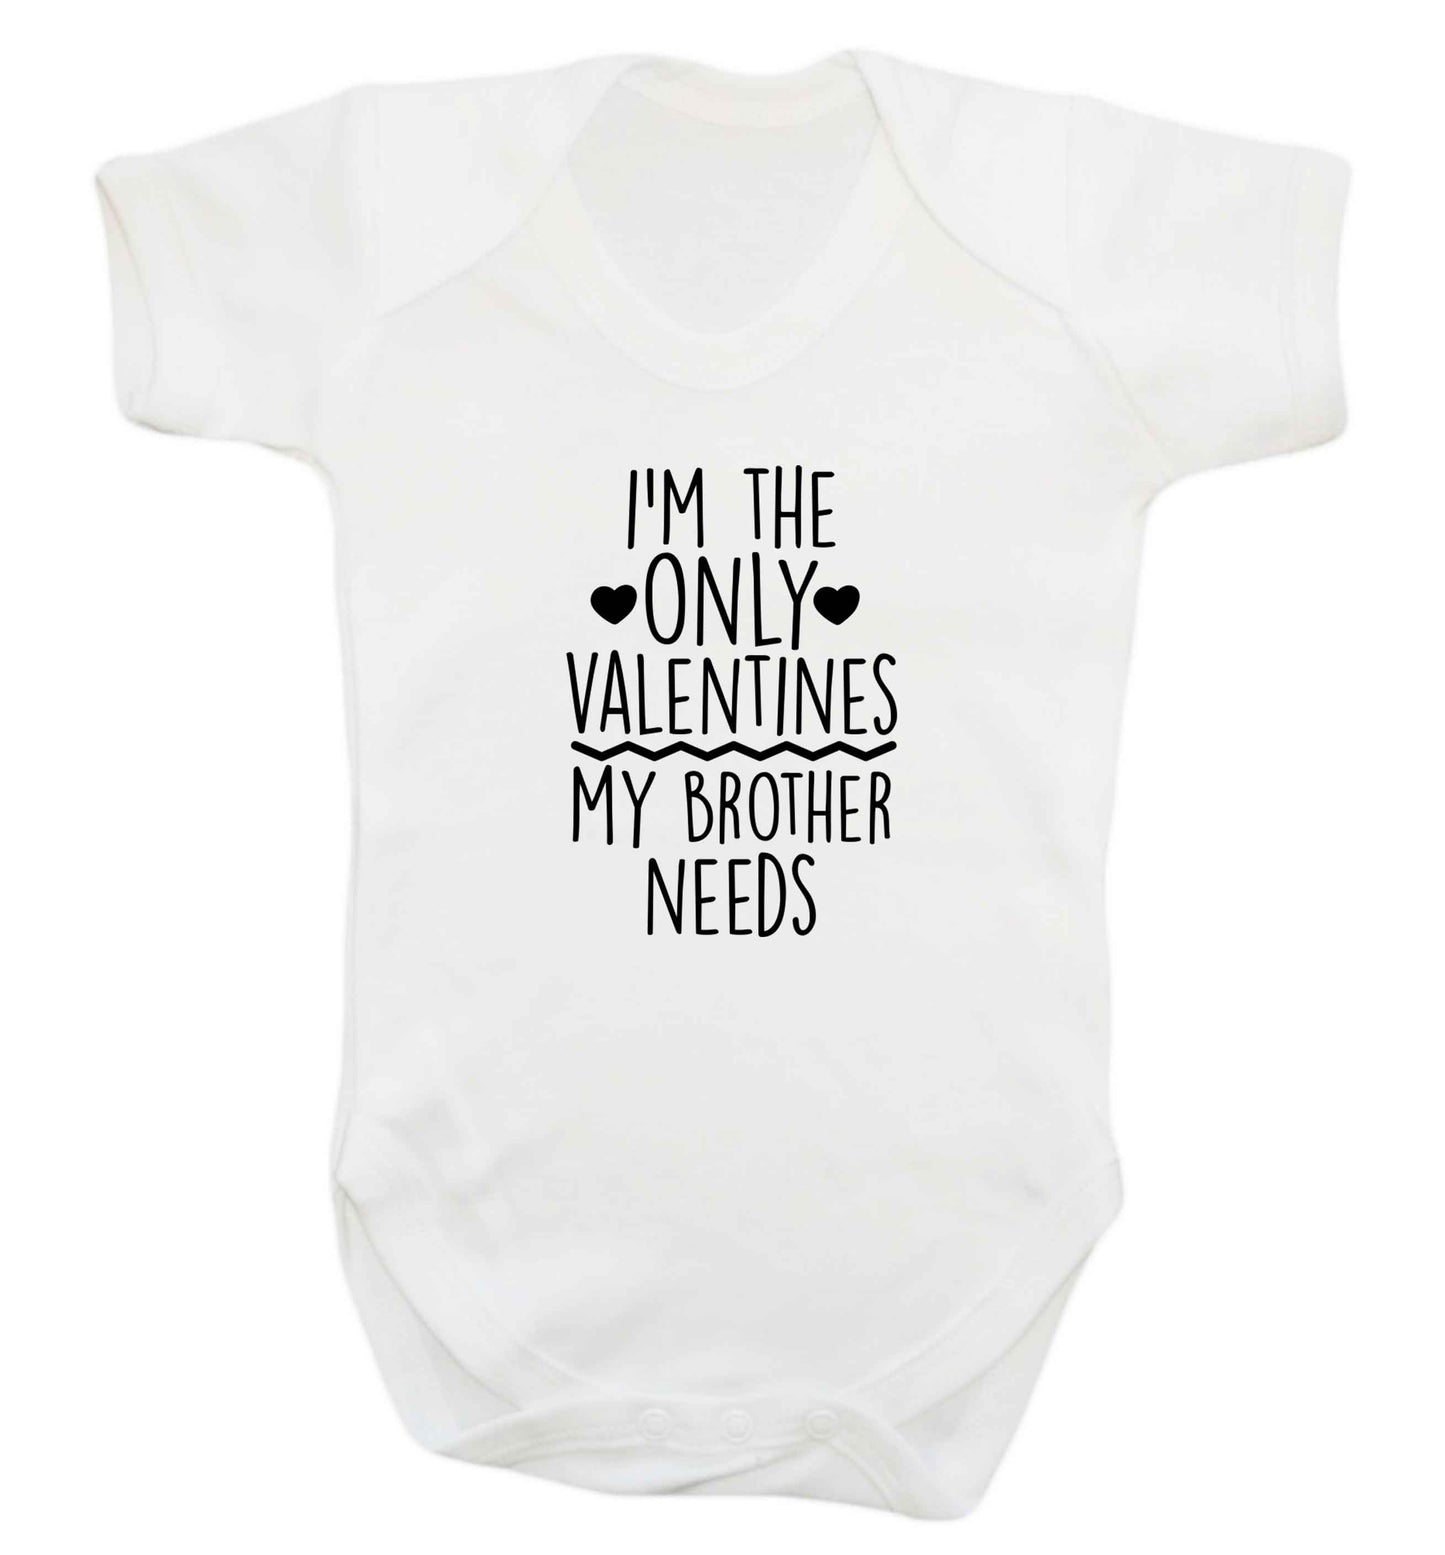 I'm the only valentines my brother needs baby vest white 18-24 months